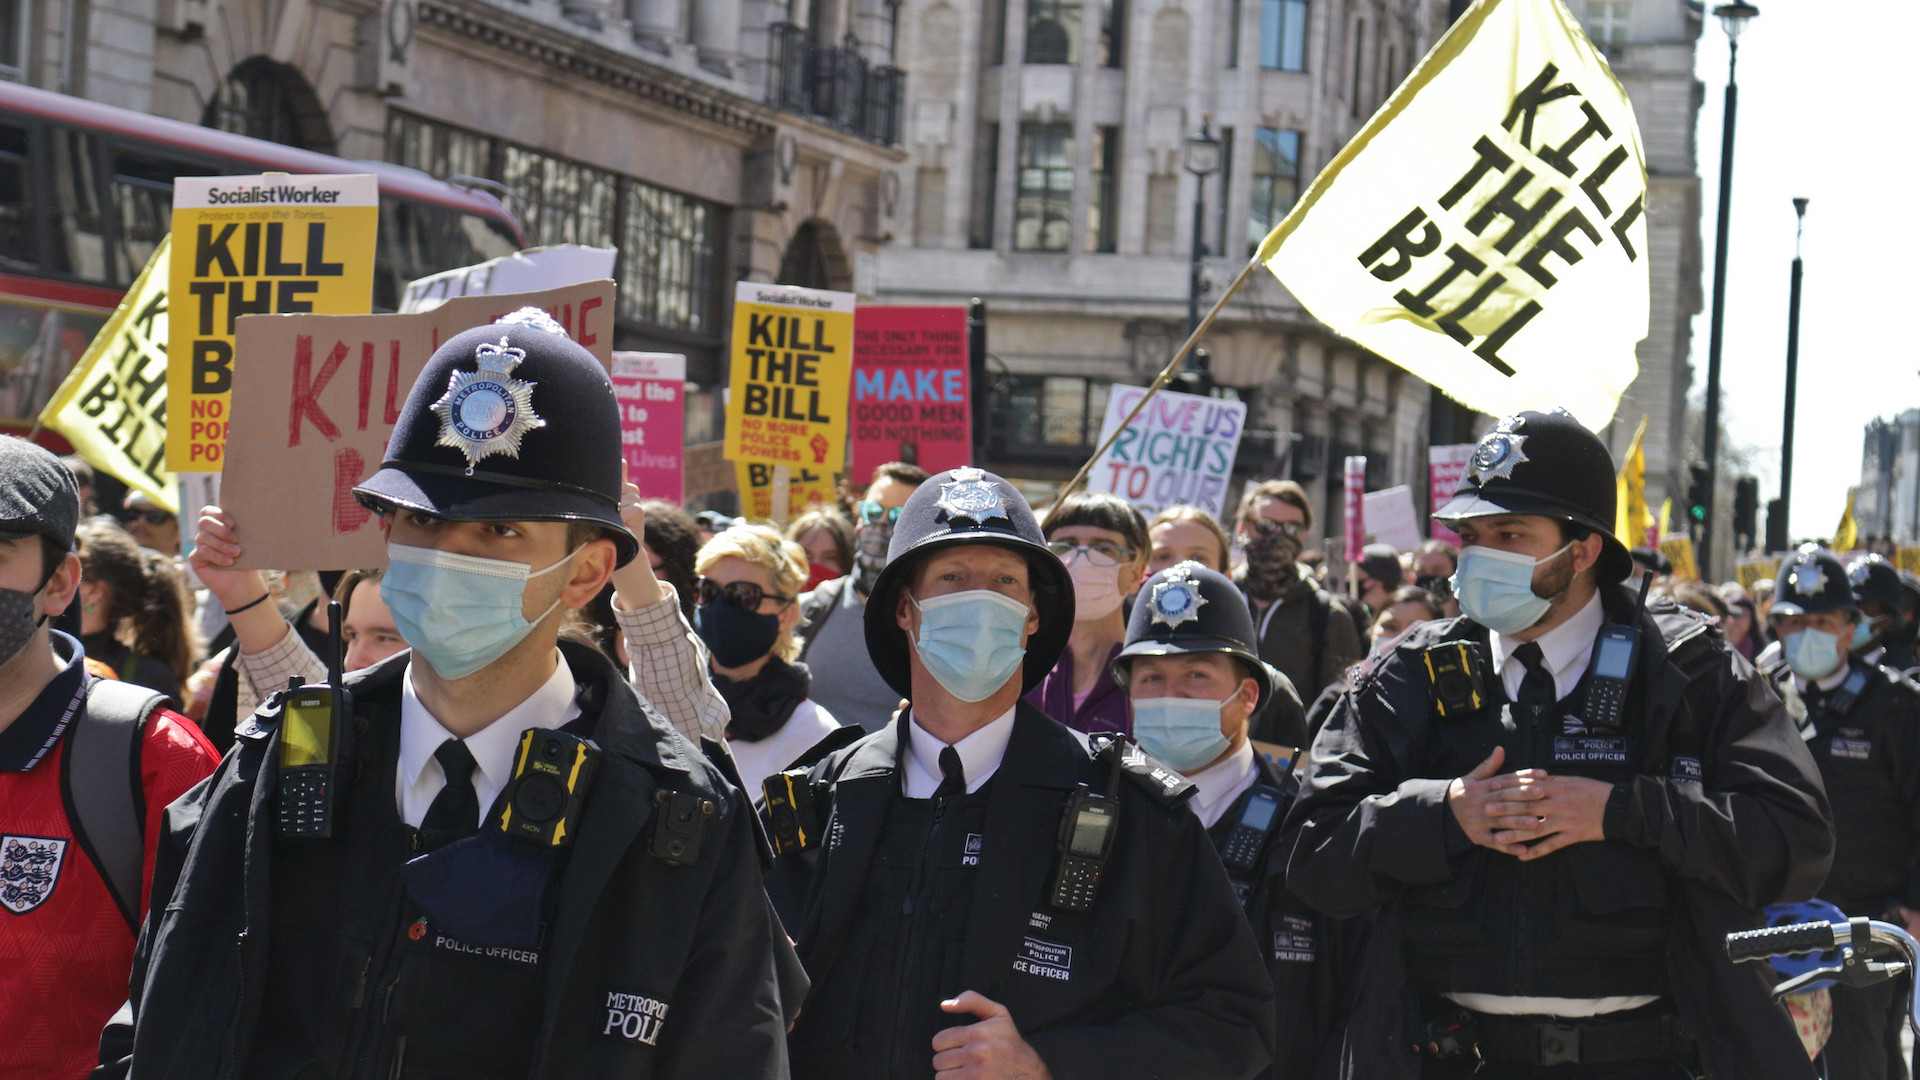 Protestors and police at a Kill the Bill march in central London, April 17